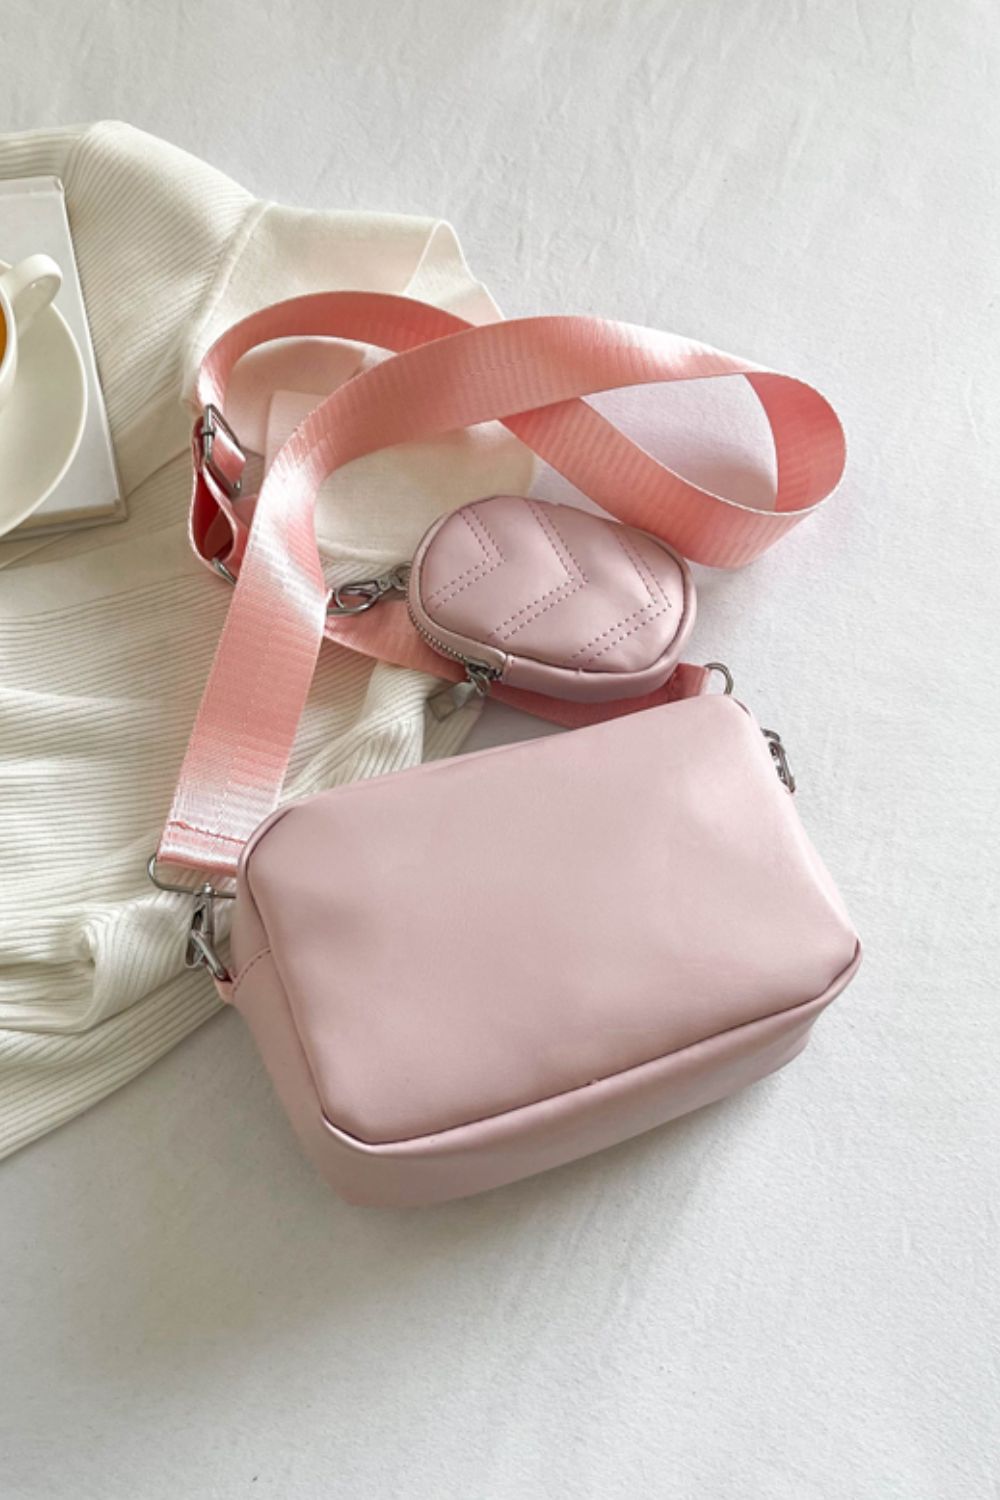 pu leather shoulder bag with small purse, blush pink, back view, handbag on floor on top of white sweater